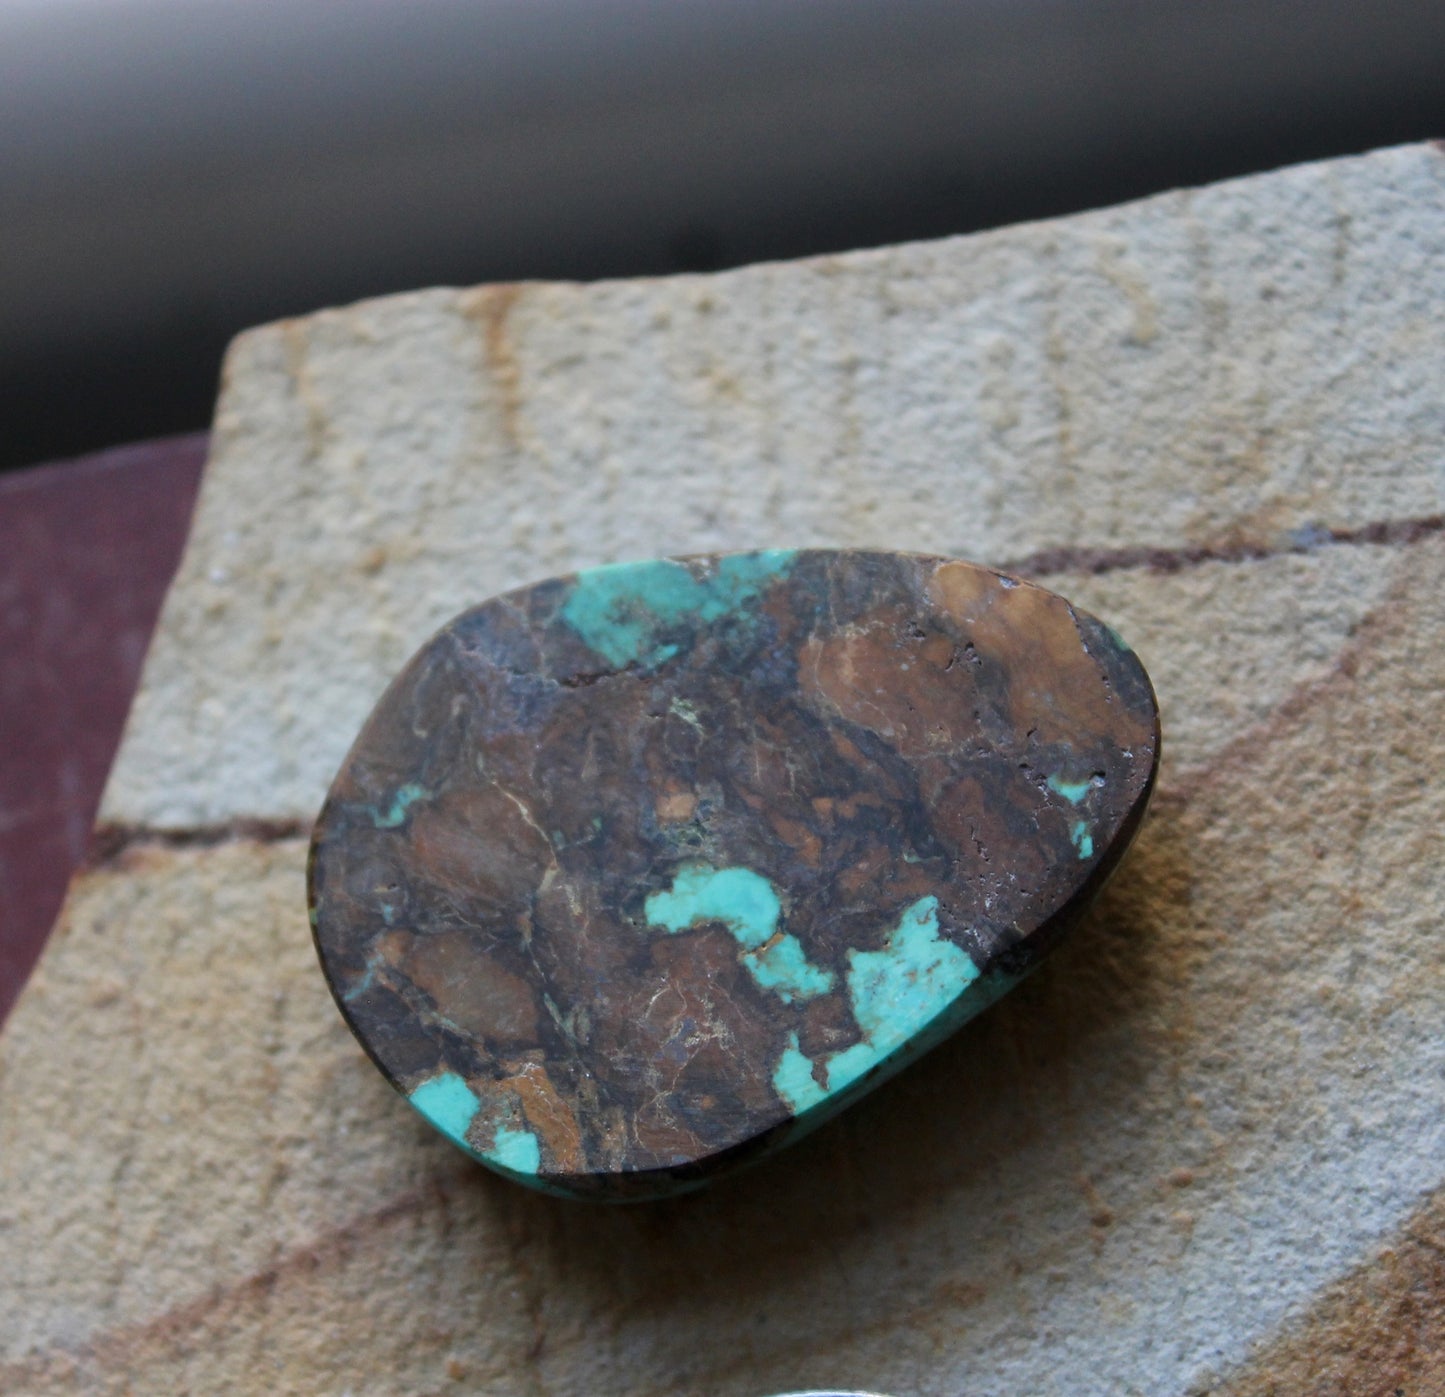 48 carat blue natural Blue June turquoise cabochon with a high dome